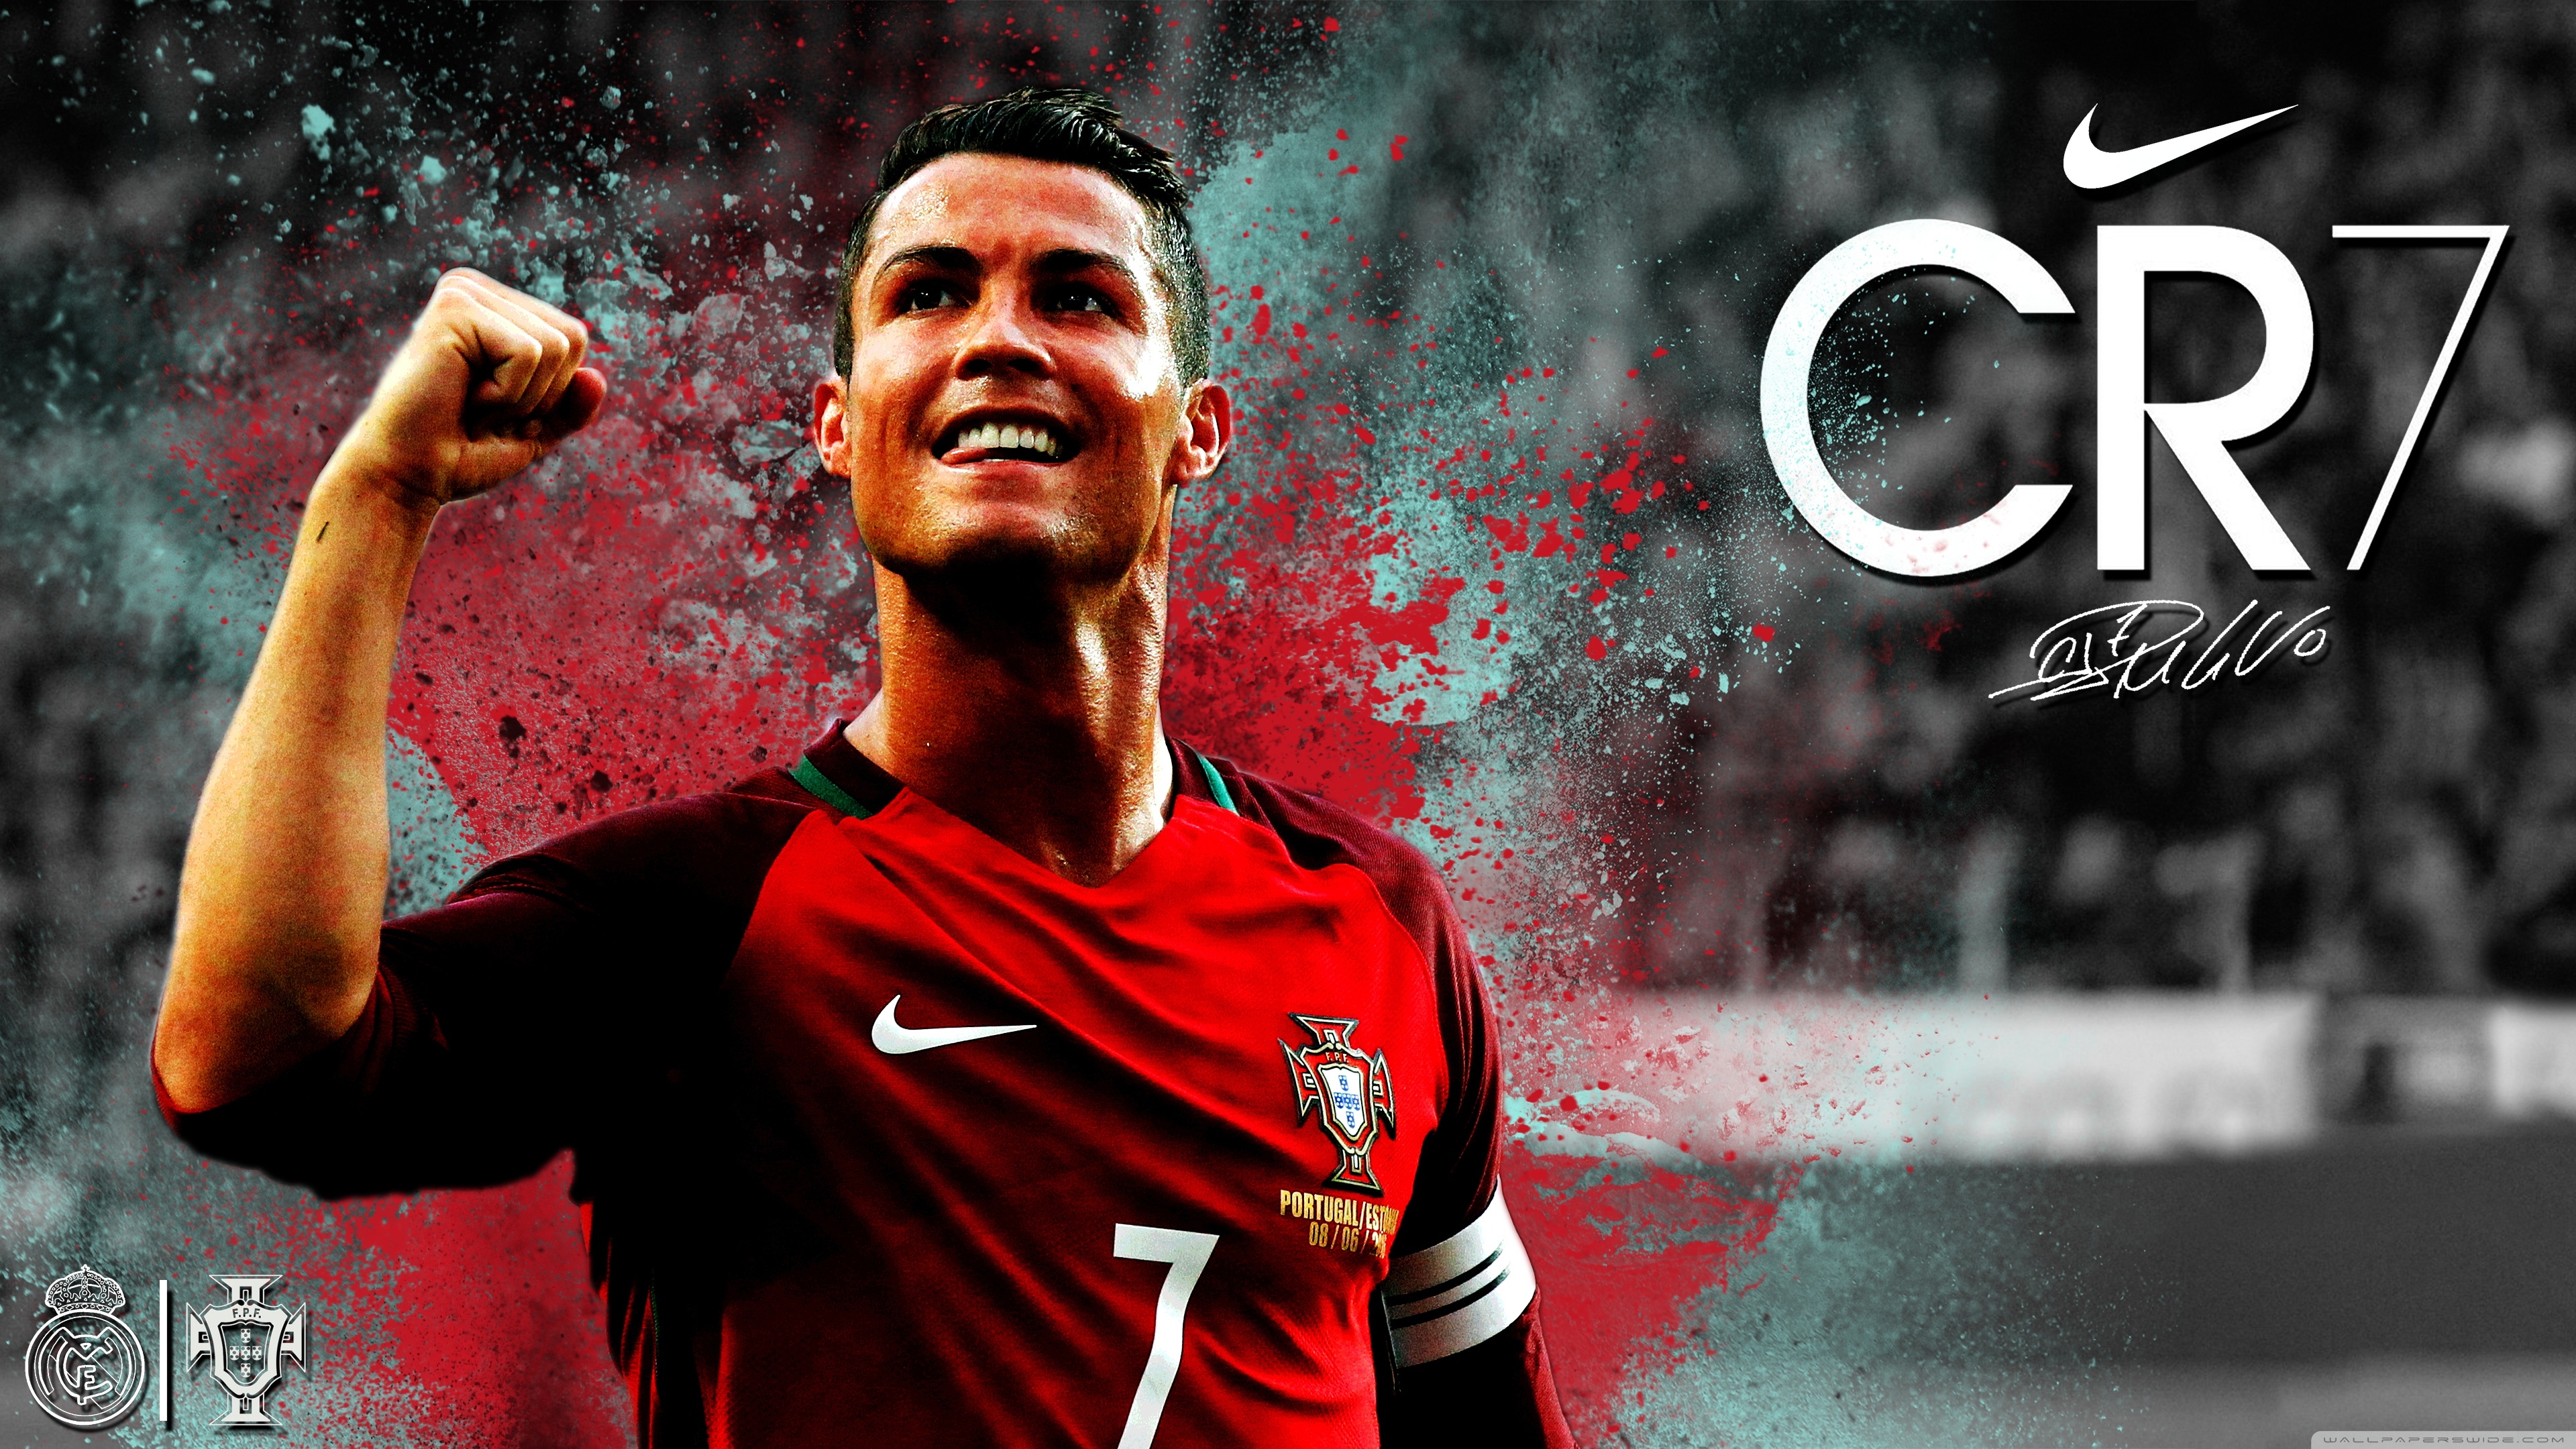 Download wallpapers Cristiano Ronaldo, Portuguese football player, Portugal  national football team, 7 number, red creative background, creative art,  Portugal, СR7, football for desktop free. Pictures for desktop free